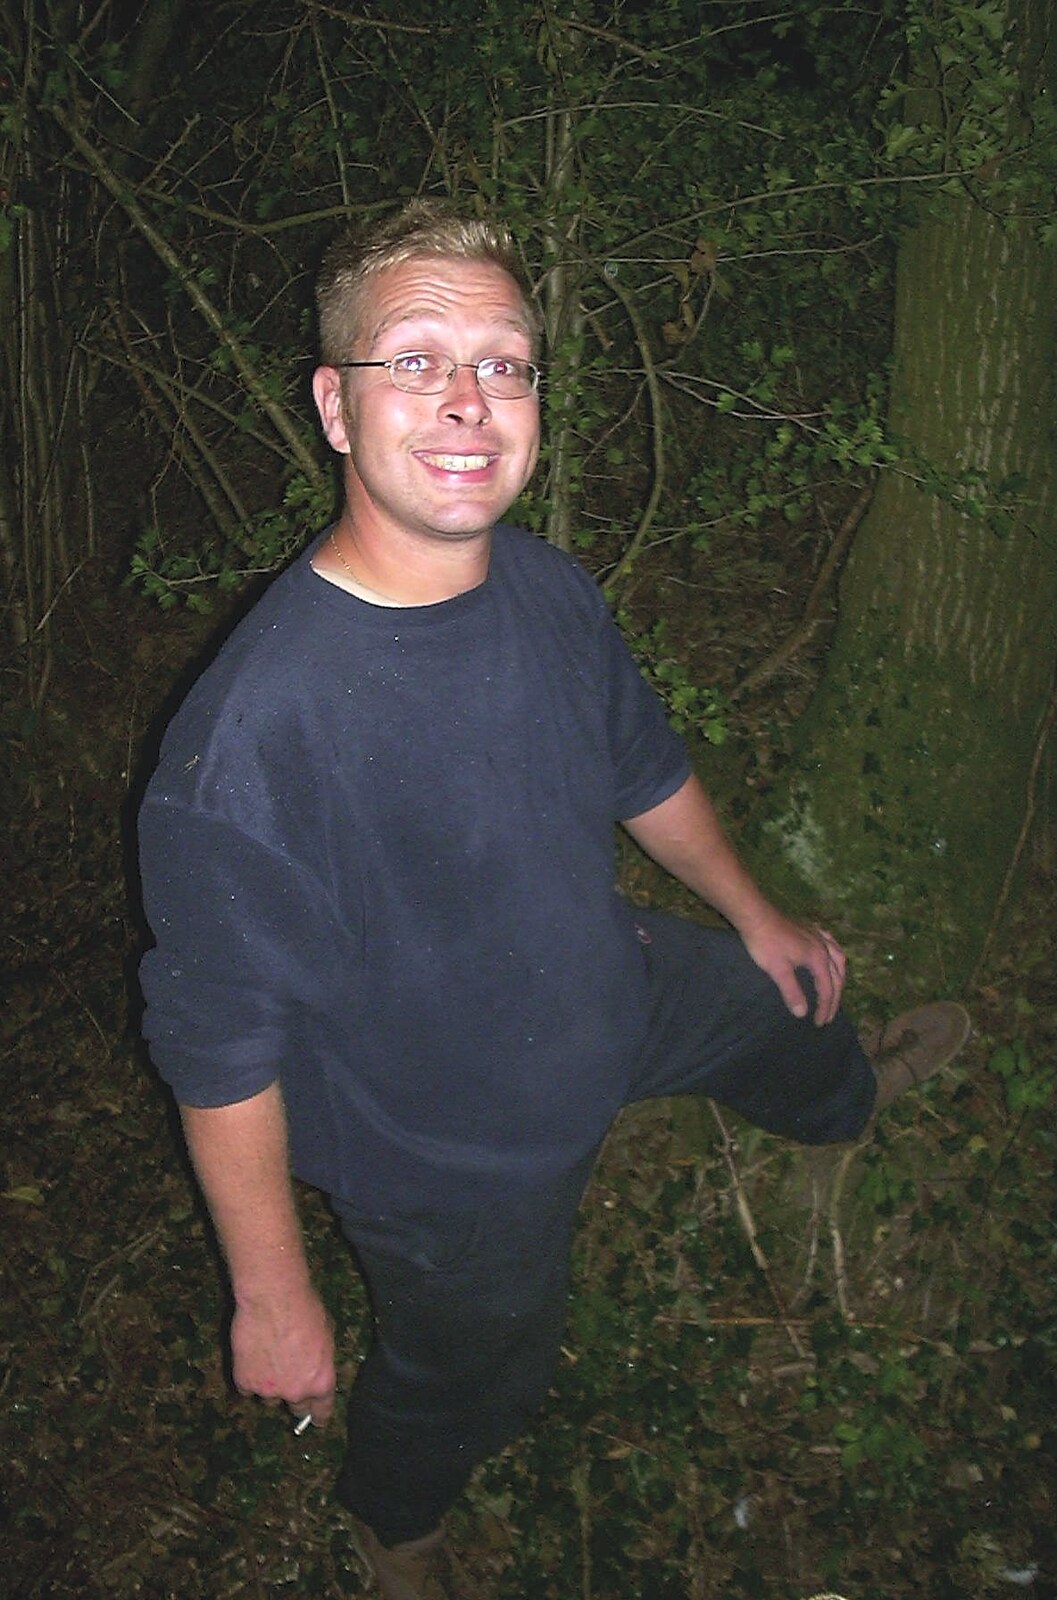 Marc in the undergrowth from BSCC Bike Rides and Ten-Pin Bowling, Thornham and Norwich - 18th September 2004